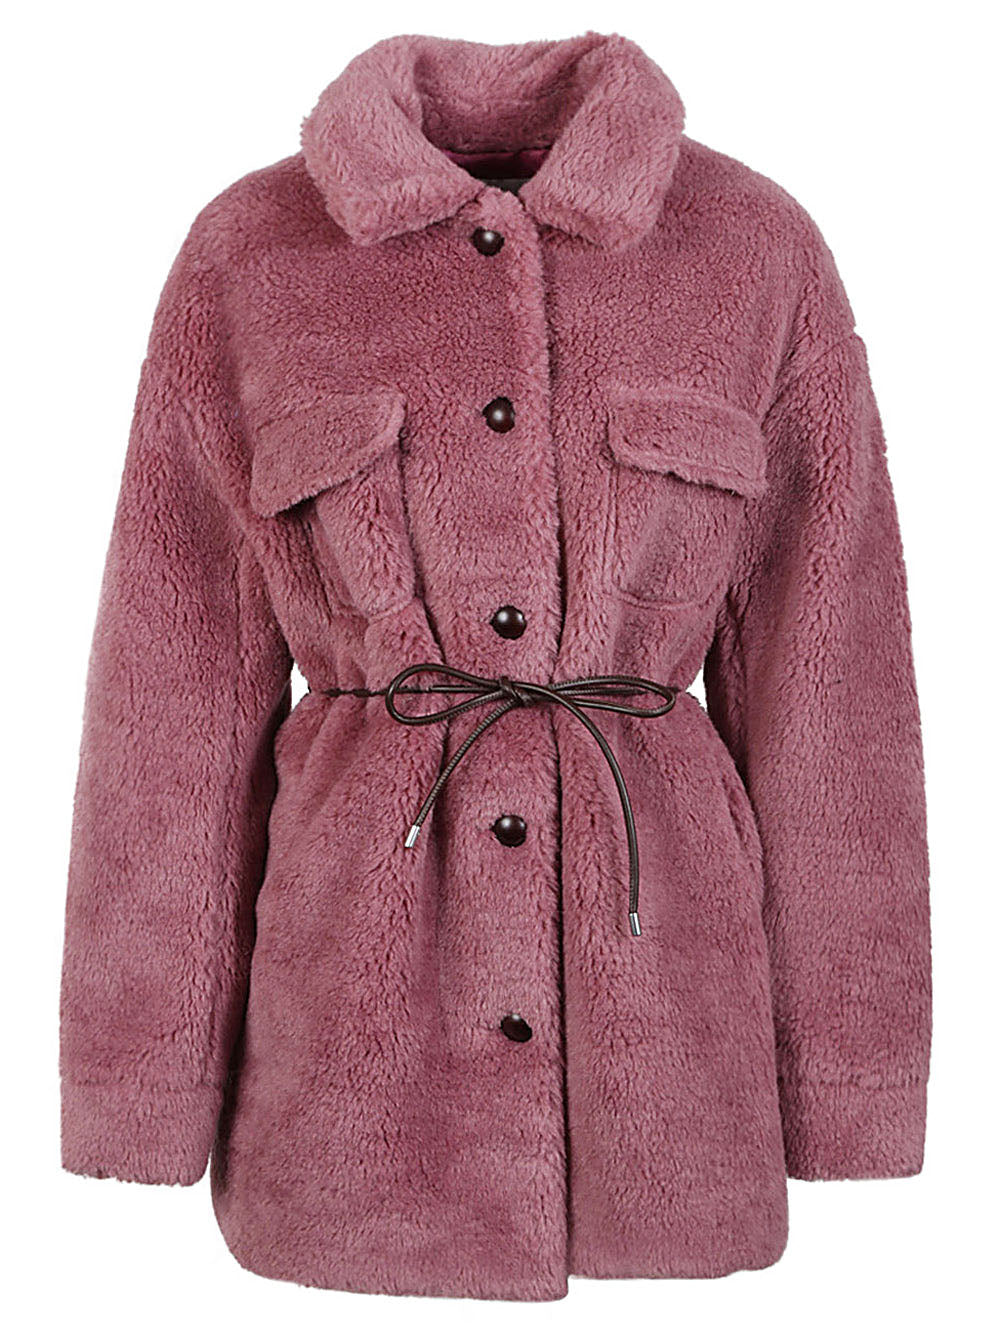 MOLLIOLLI Pink Faux Fur Jacket with Button Closure and Belt for Women - FW23